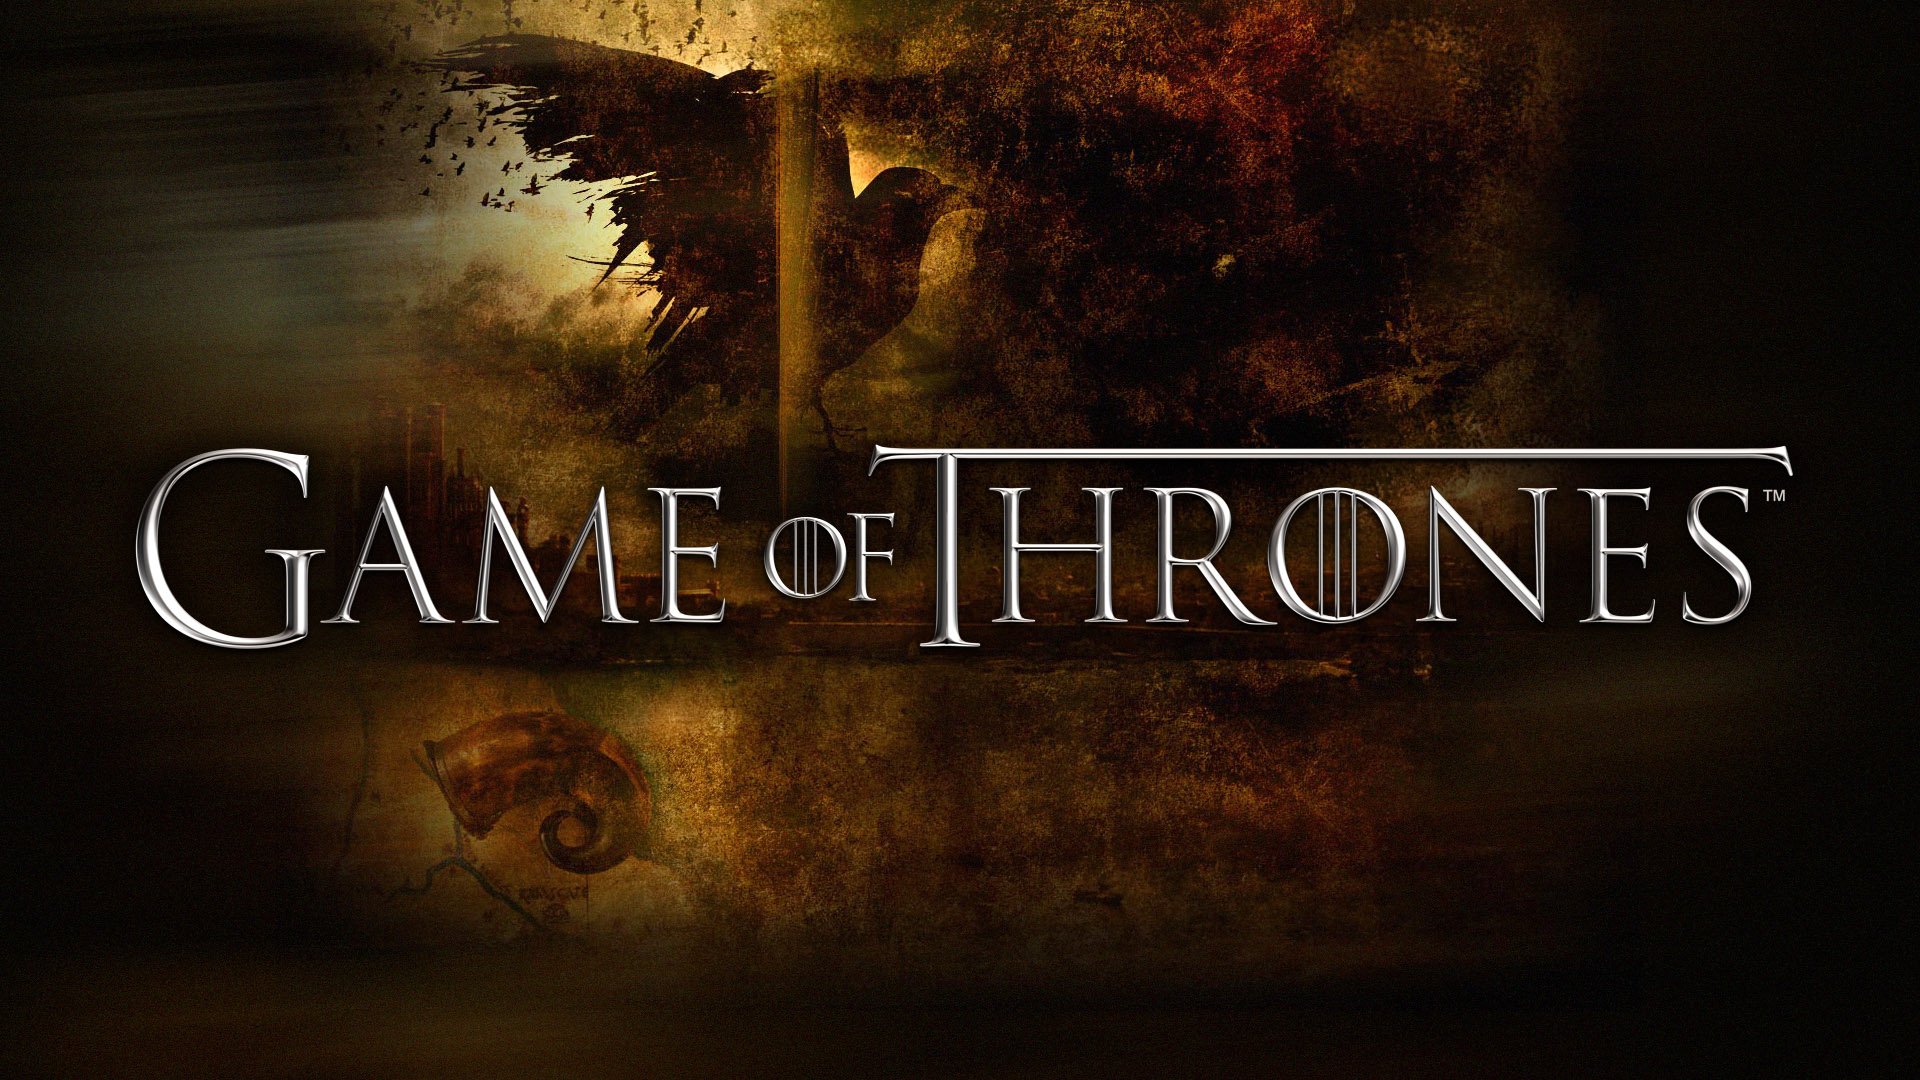 Game of Thrones Wallpapers hd 1920x1080